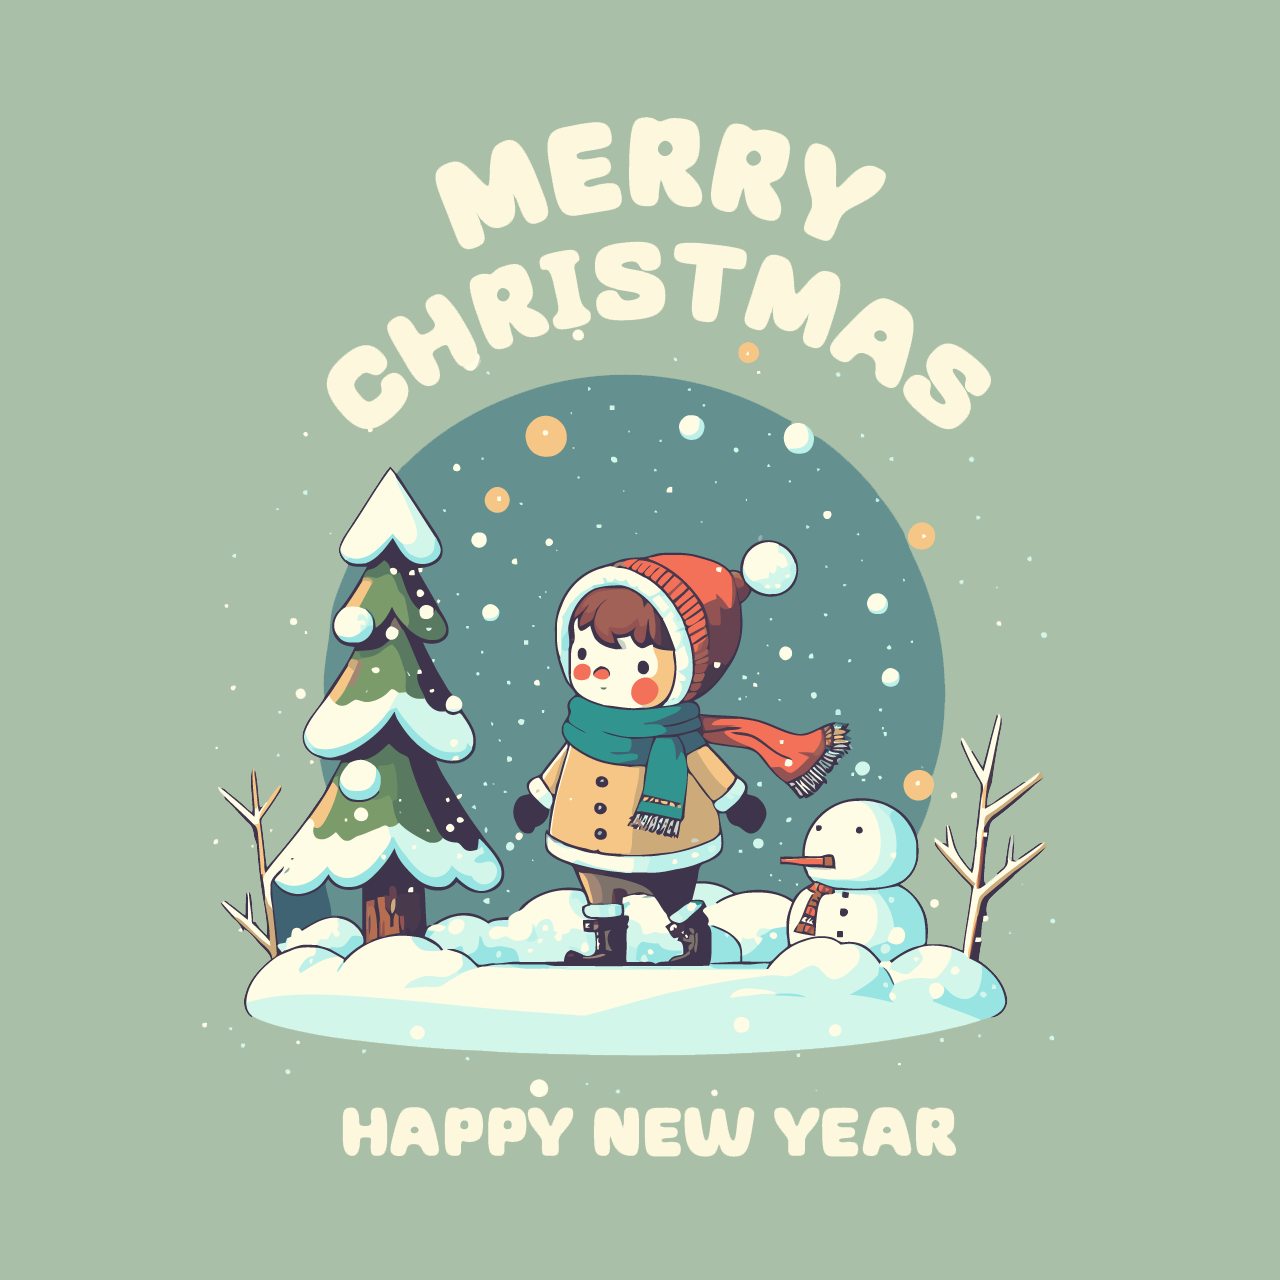 Merry christmas happy new year greetings card invitation banner flat